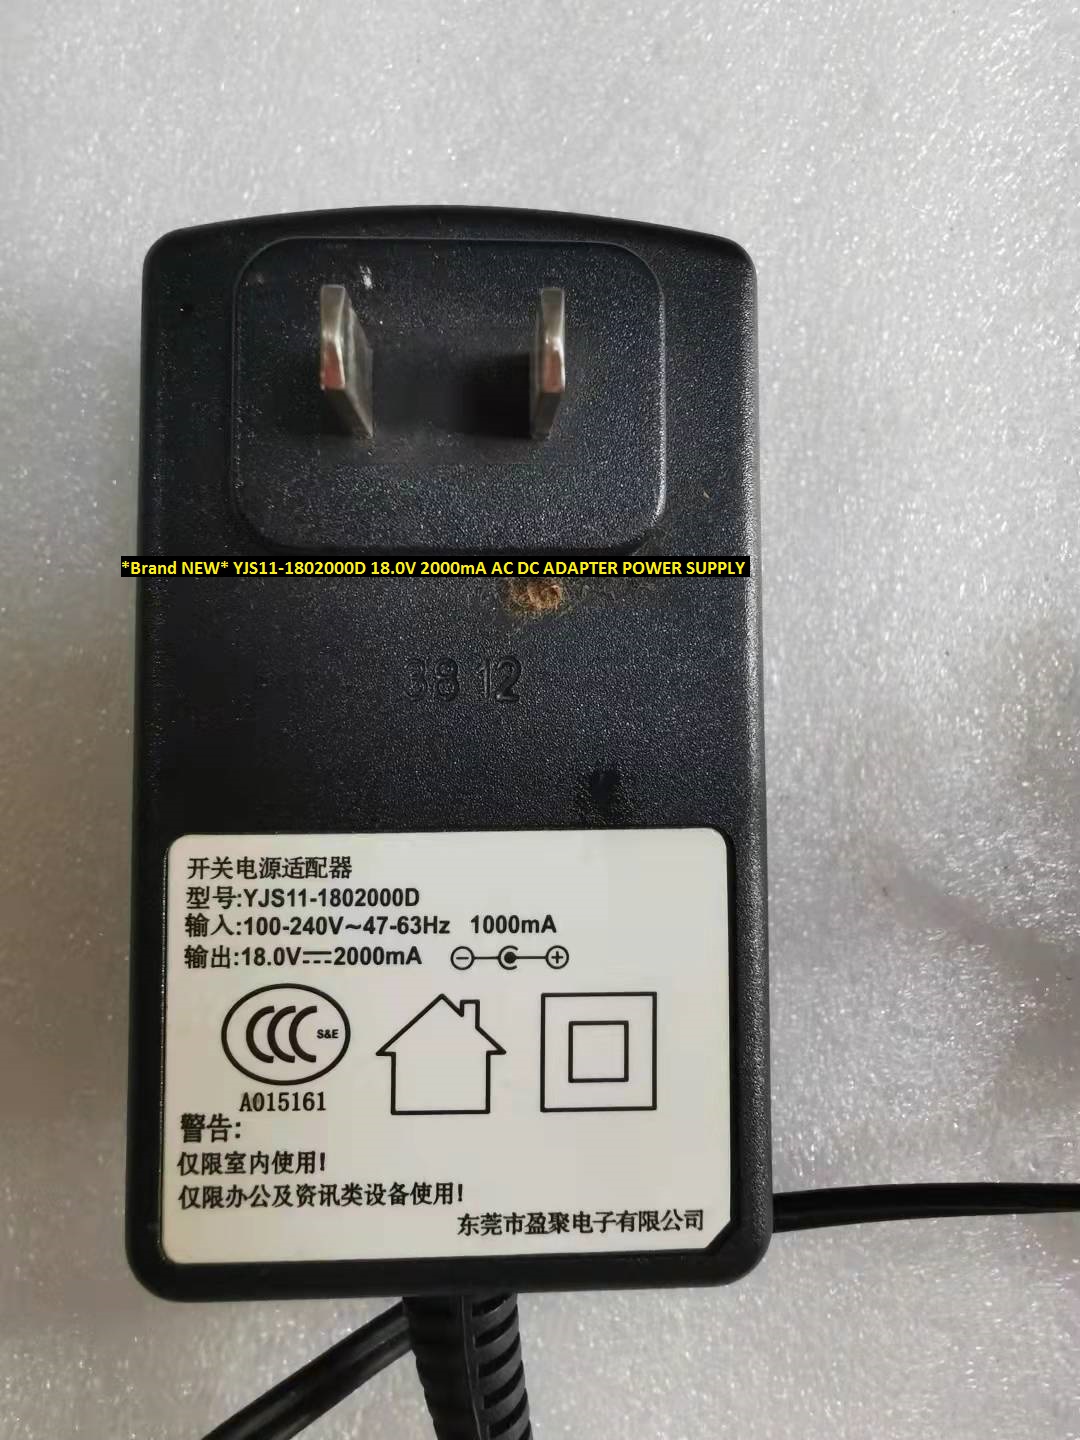 *Brand NEW* YJS11-1802000D 18.0V 2000mA AC DC ADAPTER POWER SUPPLY